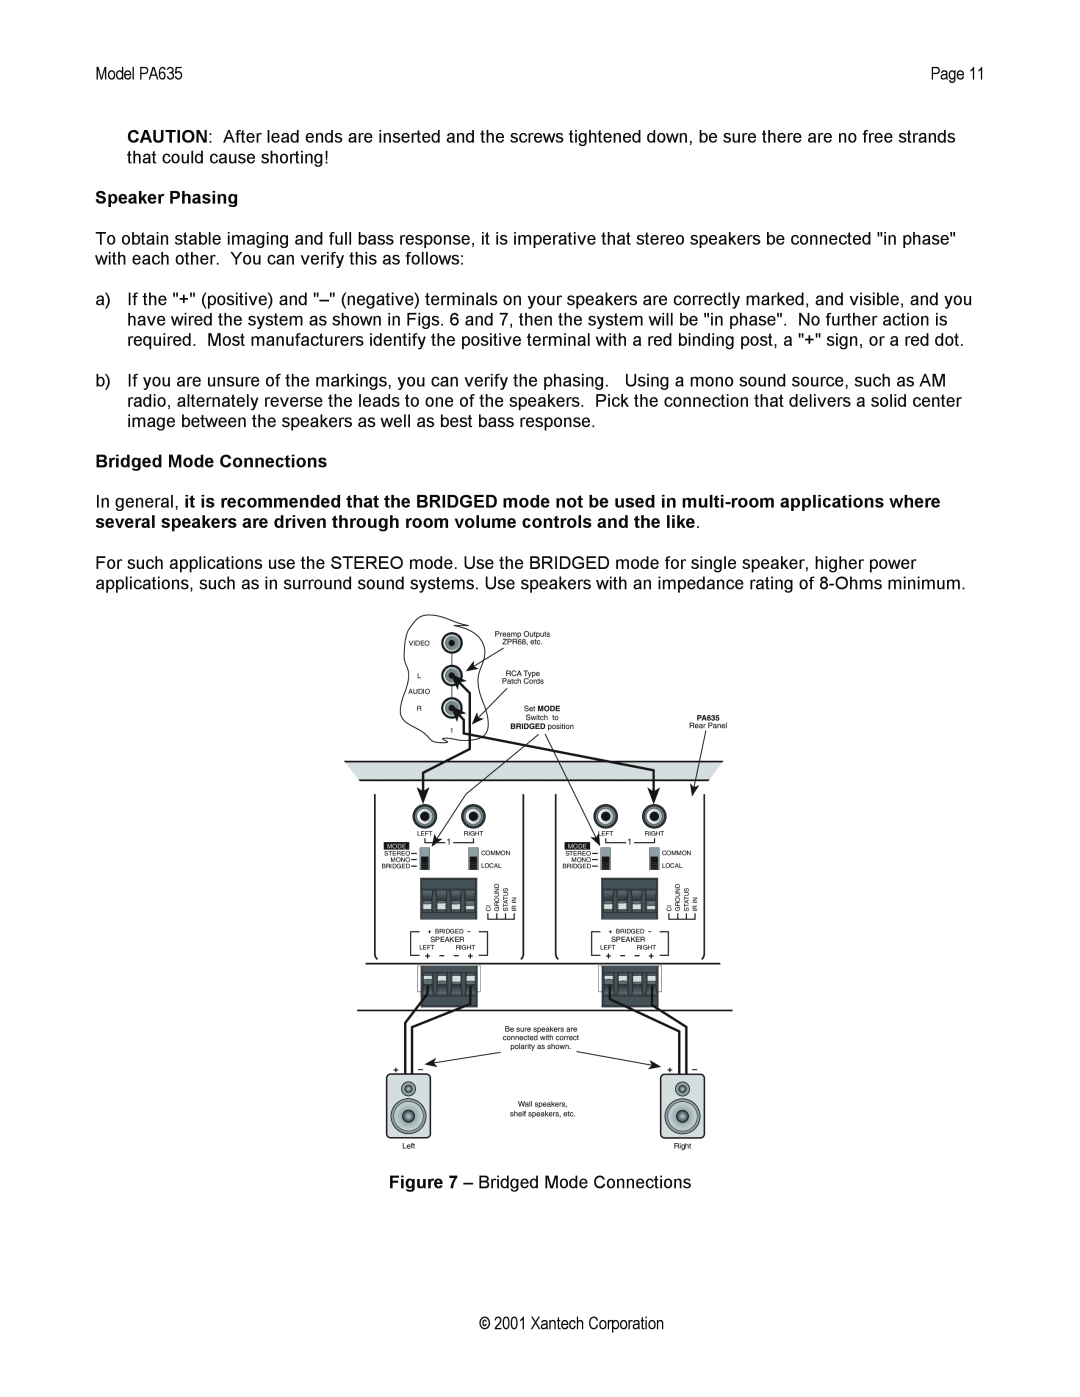 Xantech PA635 installation instructions Speaker Phasing, Bridged Mode Connections 